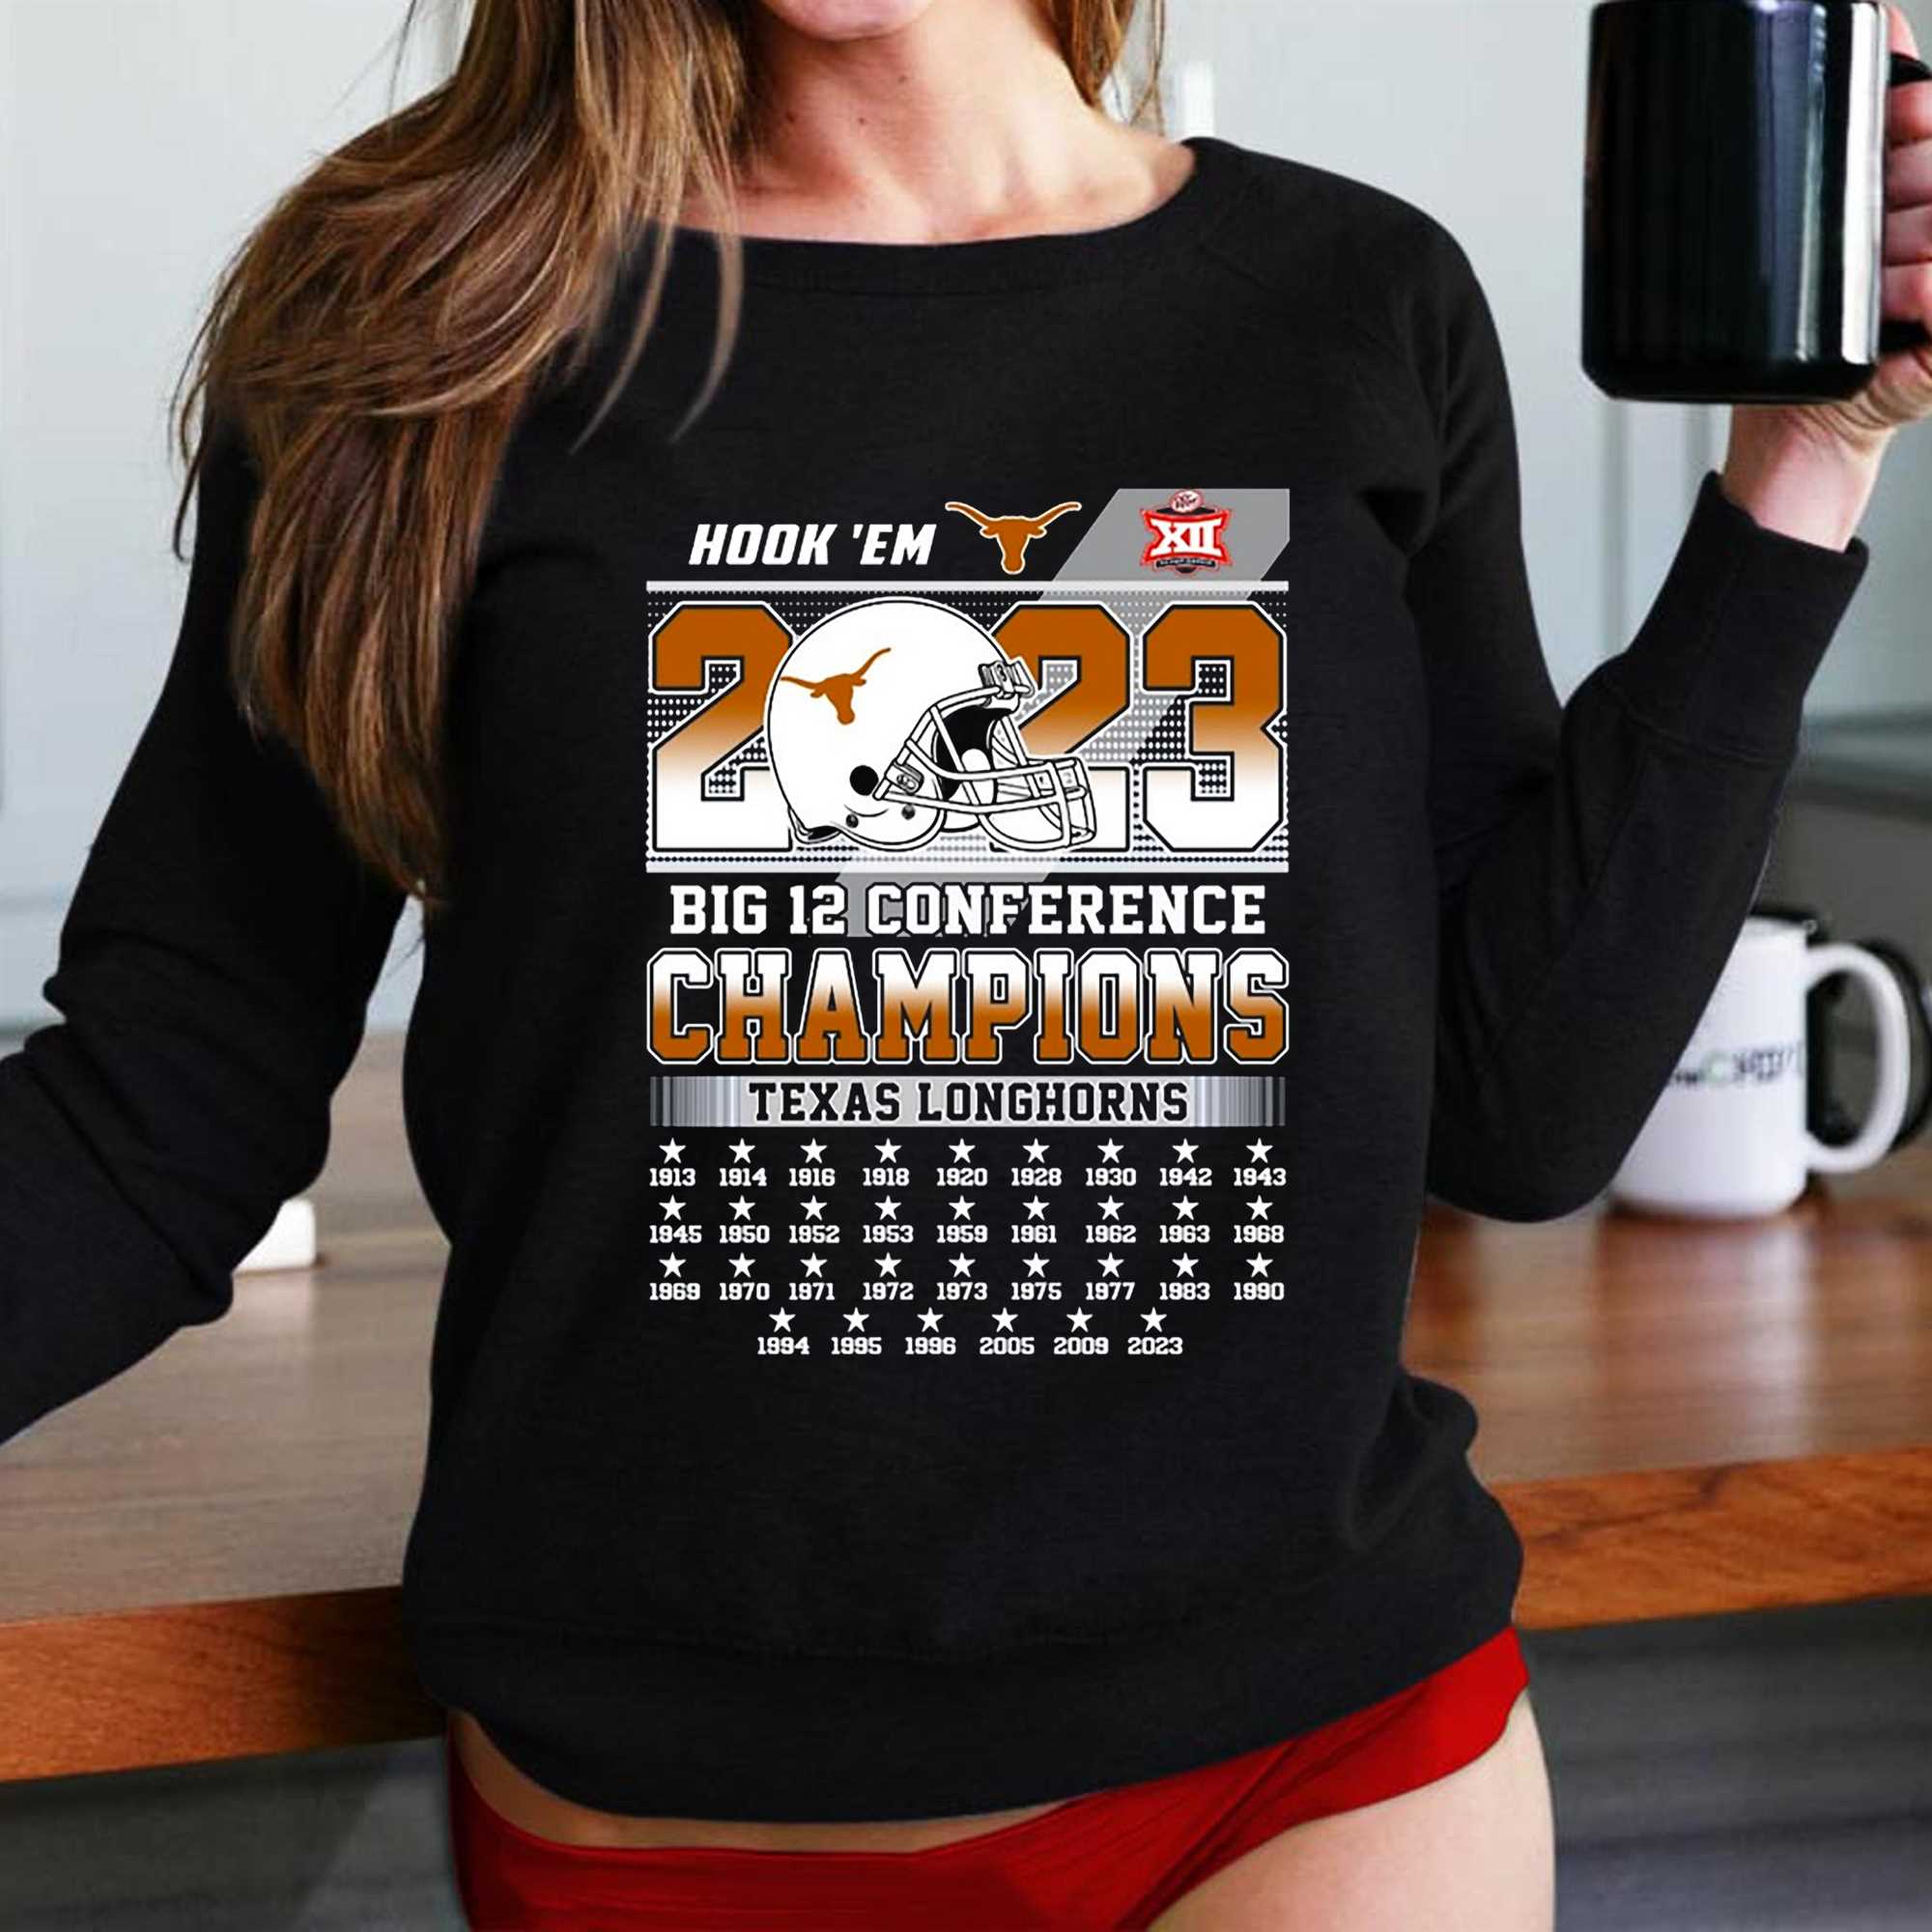 Big 12 Champion Texas Longhorn Hook Em T-shirt - Print your thoughts. Tell  your stories.